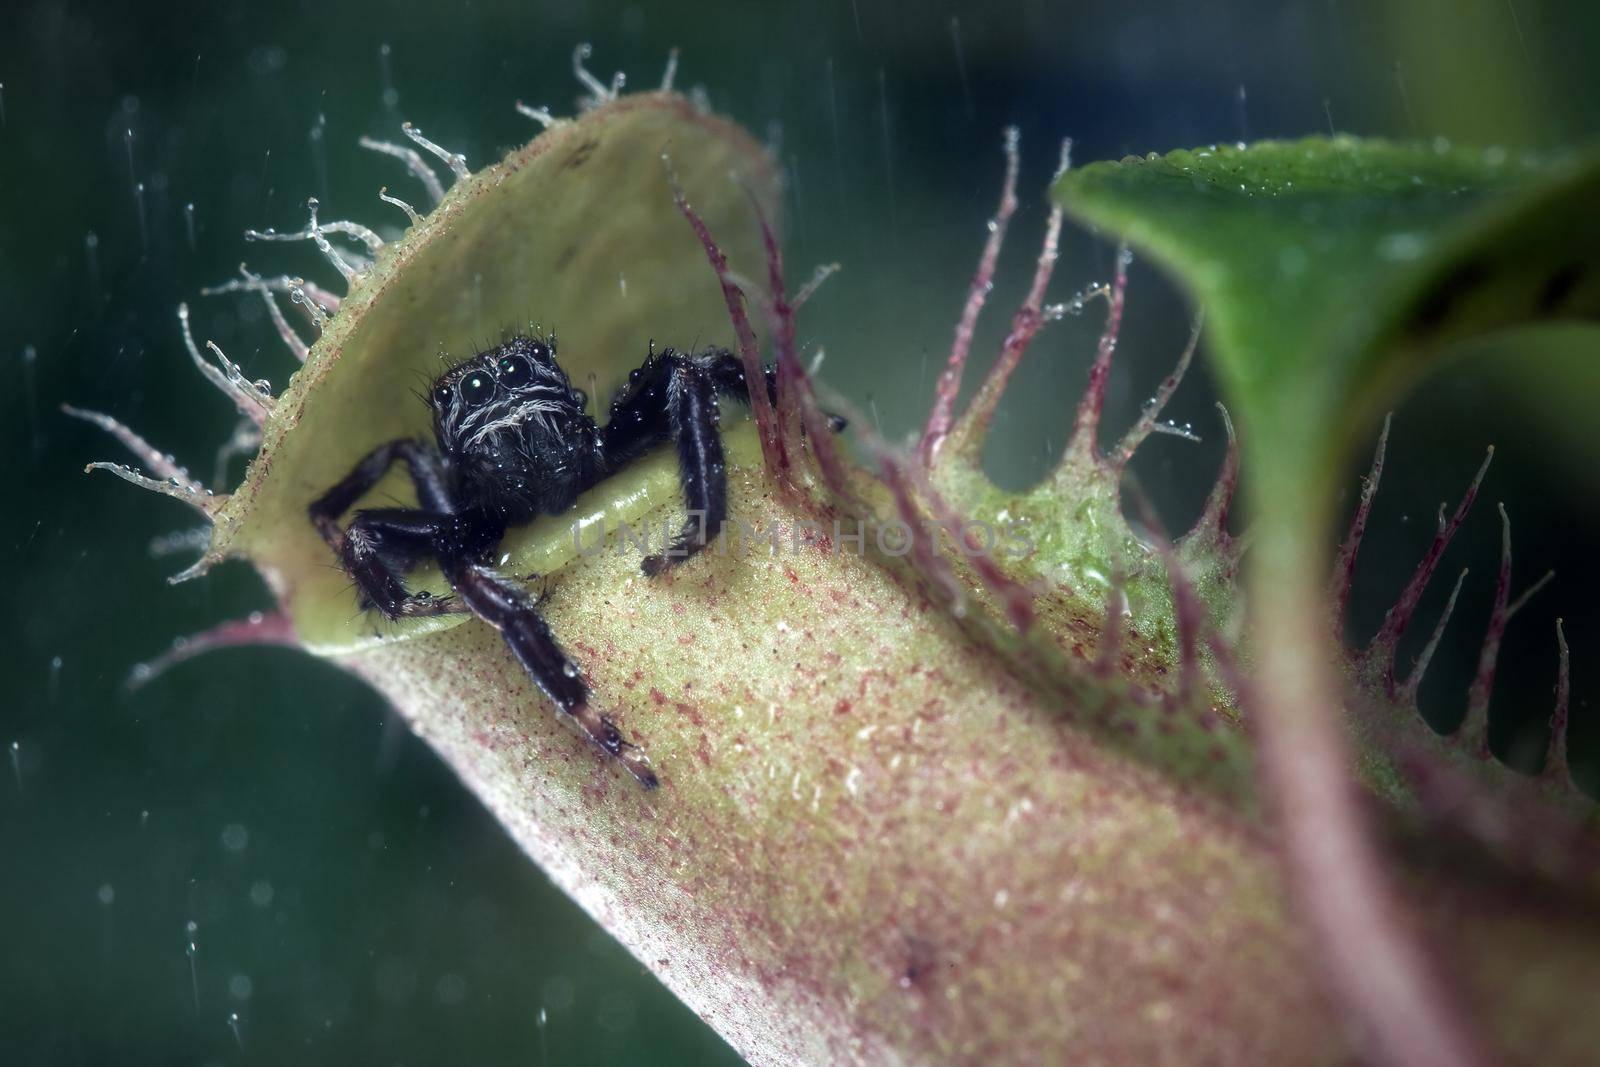 Jumping spider hids from the rain in tropical pitcher plant by Lincikas